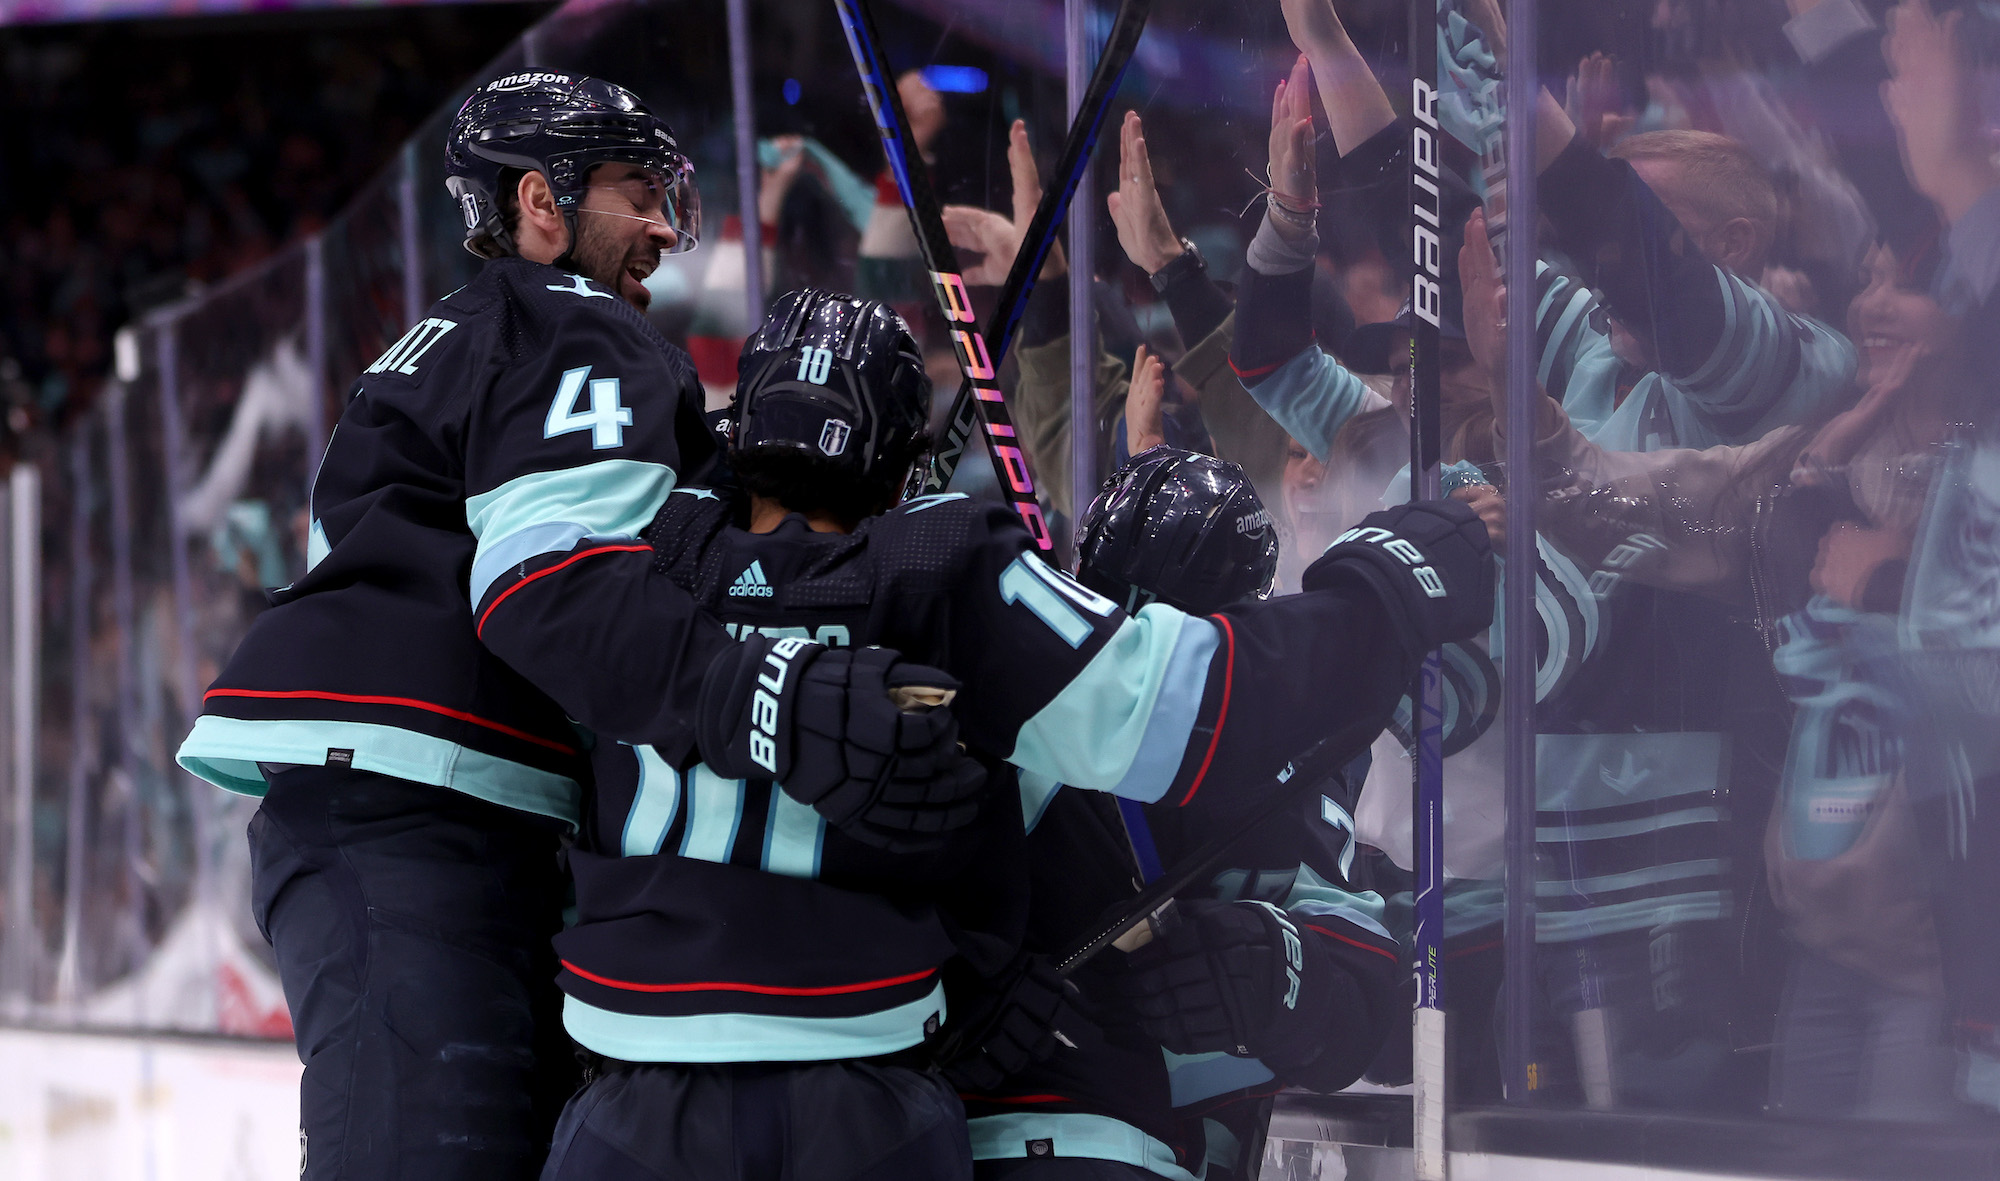 SEATTLE, WASHINGTON - APRIL 24: The Seattle Kraken celebrate the winning goal by Jordan Eberle #7 against the Colorado Avalanche during overtime in Game Four of the First Round of the 2023 Stanley Cup Playoffs at Climate Pledge Arena on April 24, 2023 in Seattle, Washington. (Photo by Steph Chambers/Getty Images)